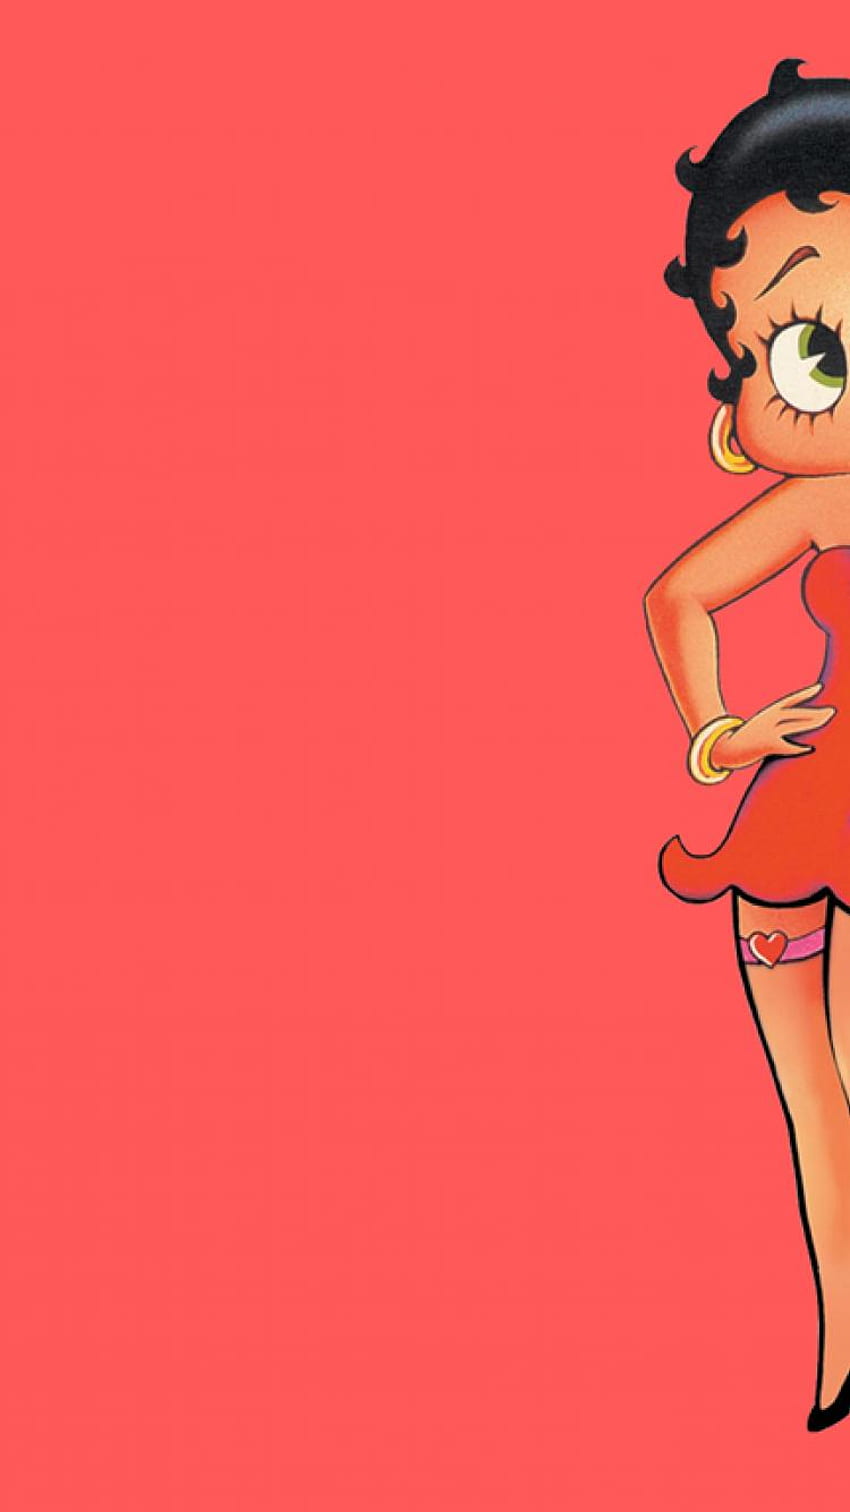 HD wallpaper betty boop copy space childhood toy women one person  females  Wallpaper Flare